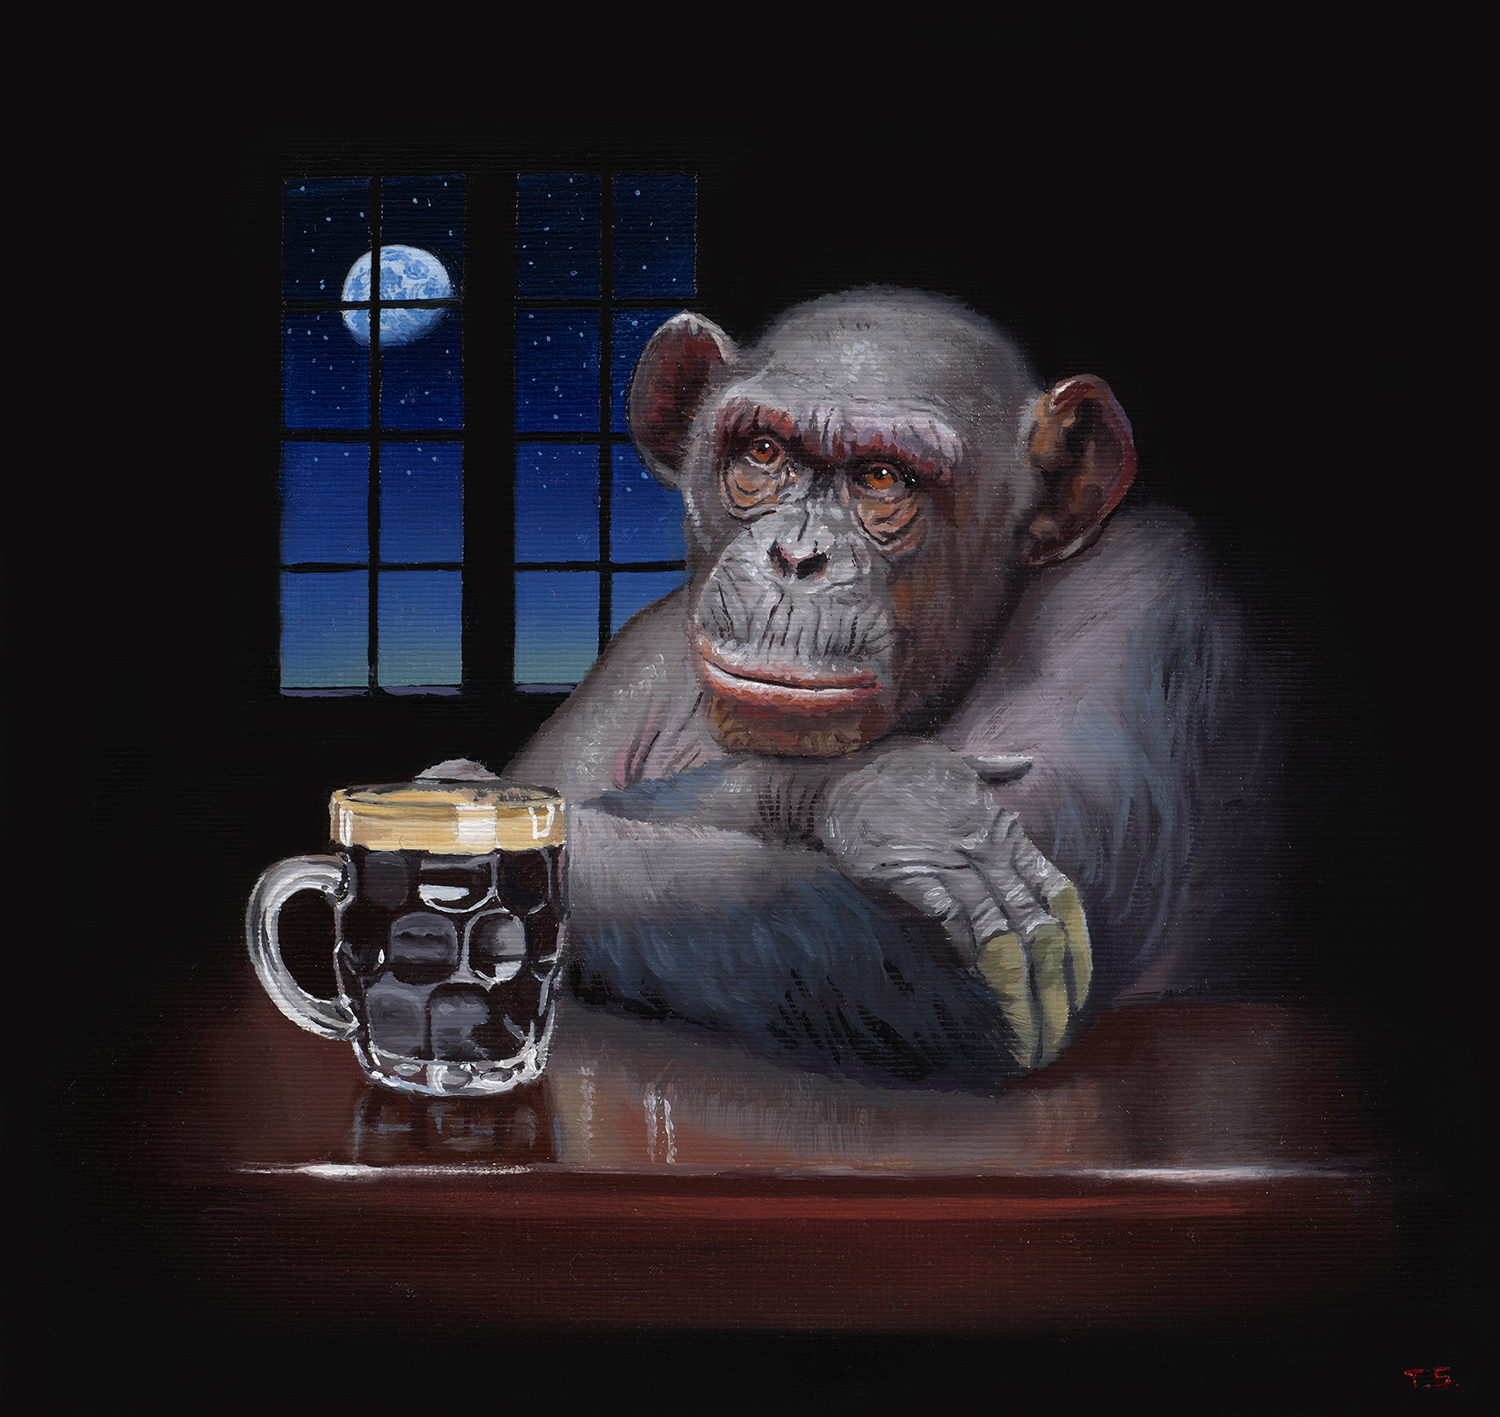 A monkey in a bar having a beer with planet earth in the background - Tony South - Warm Stout on the Moon